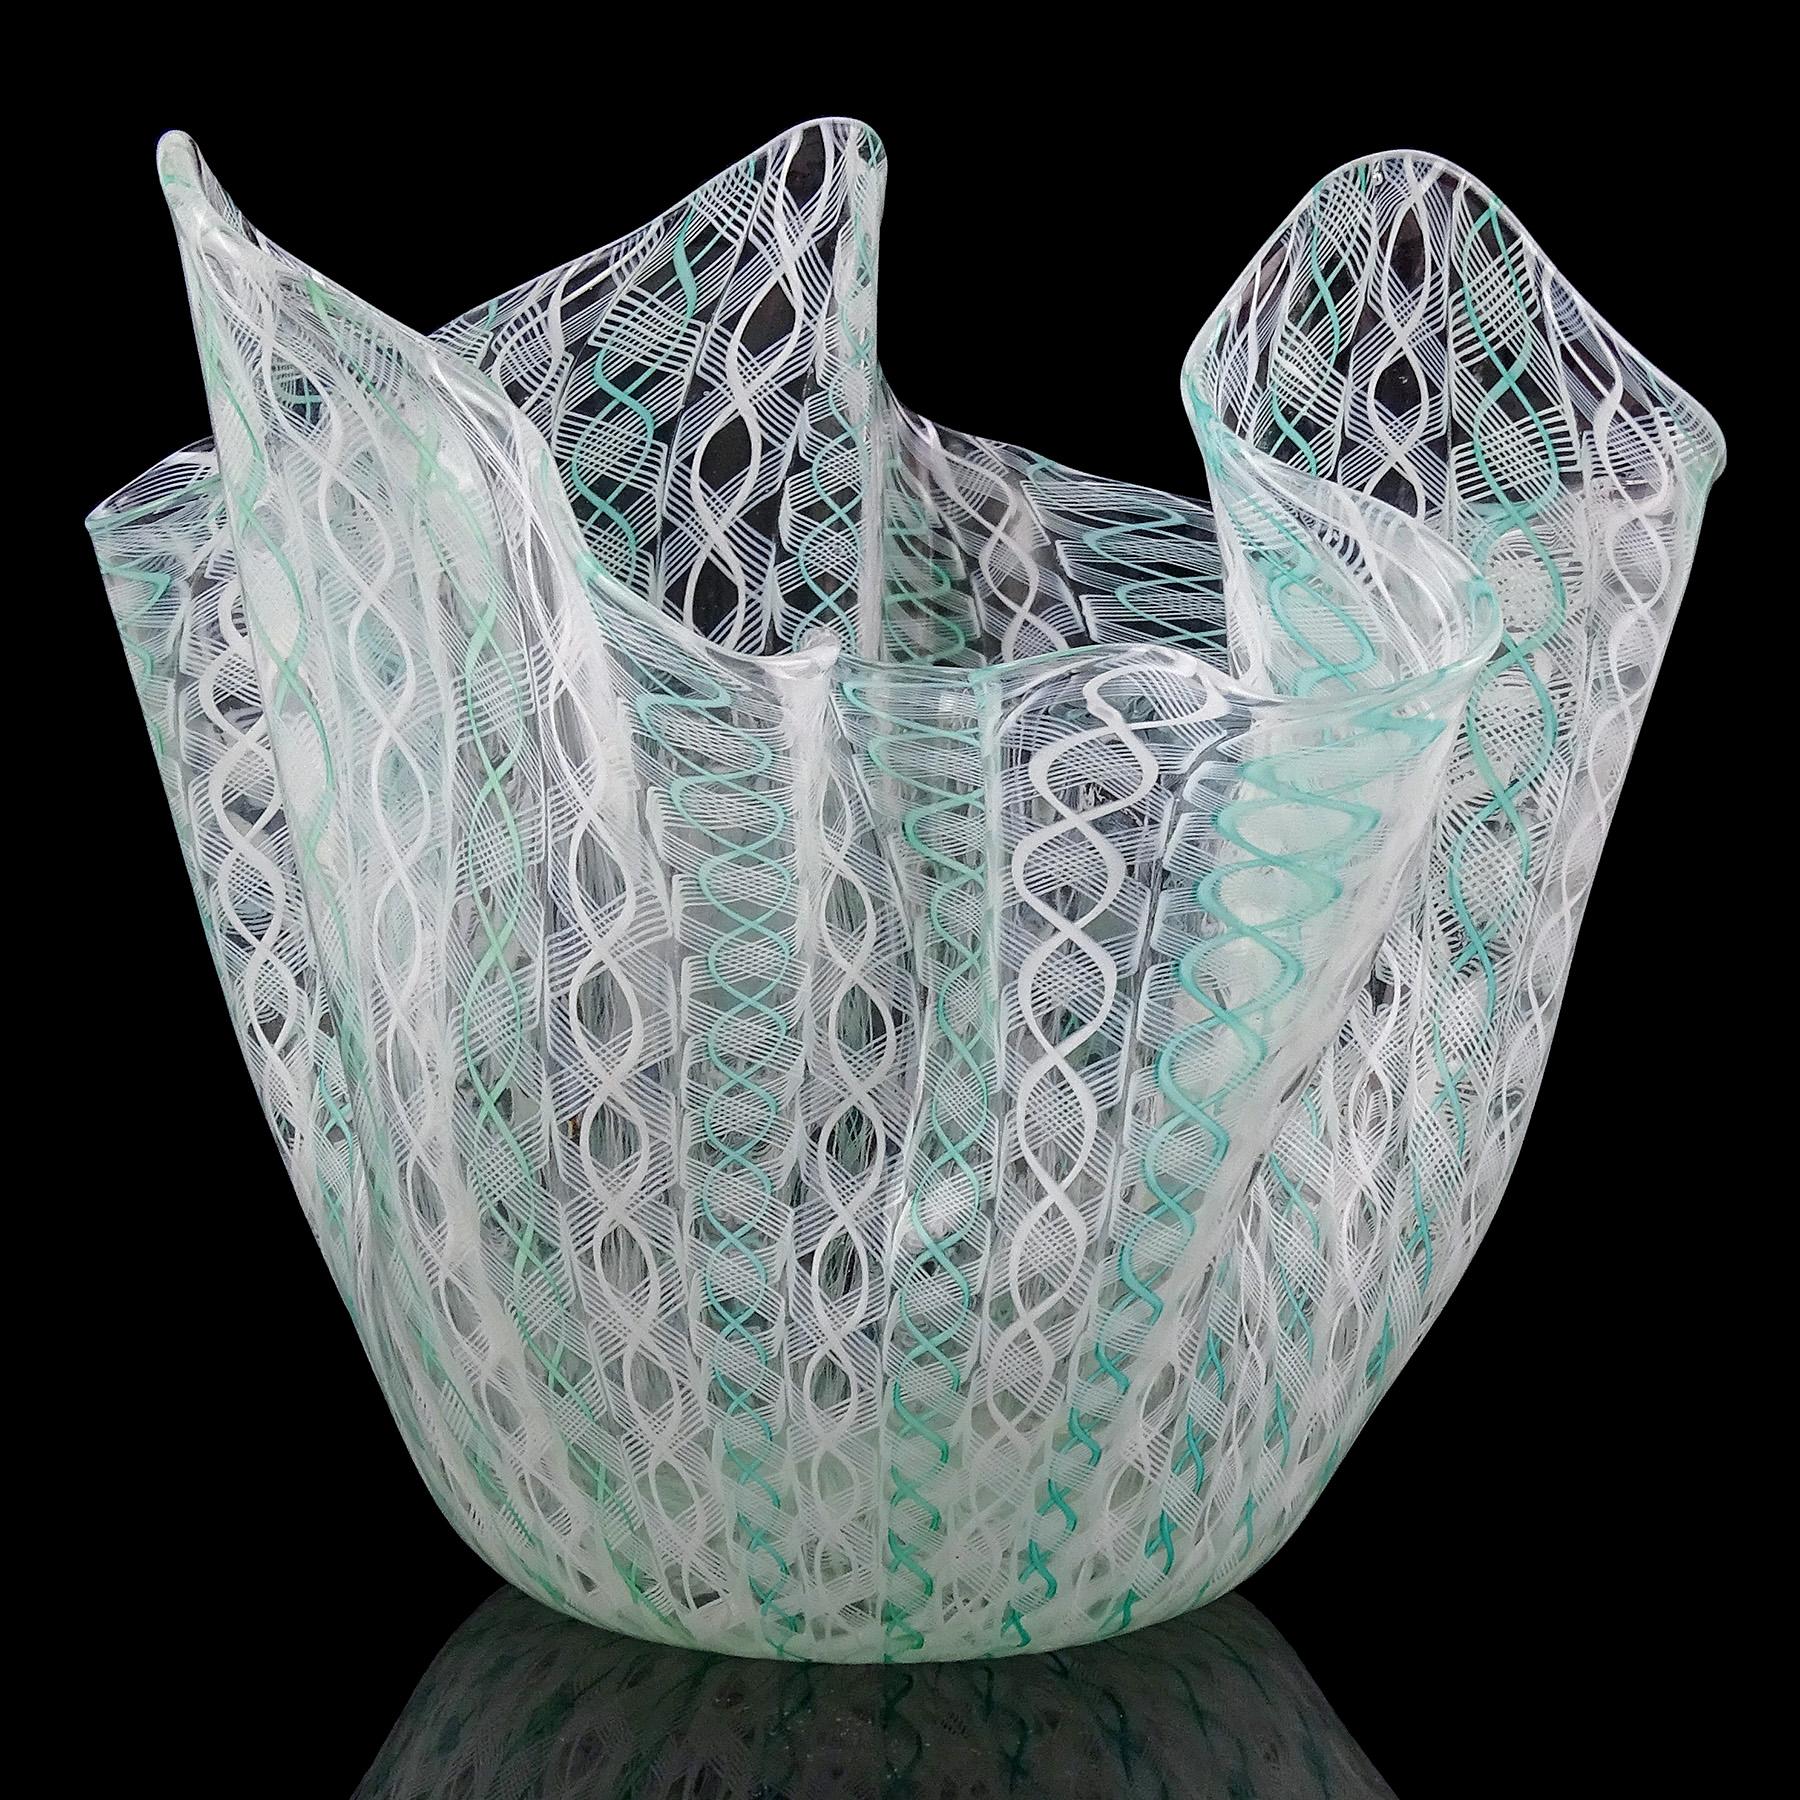 Beautiful vintage Murano hand blown intricate white and light teal green ribbons Italian art glass fazzoletto / handkerchief vase. Documented to designer Fulvio Bianconi, for the Venini company circa 1950s. The vase is signed underneath, but very